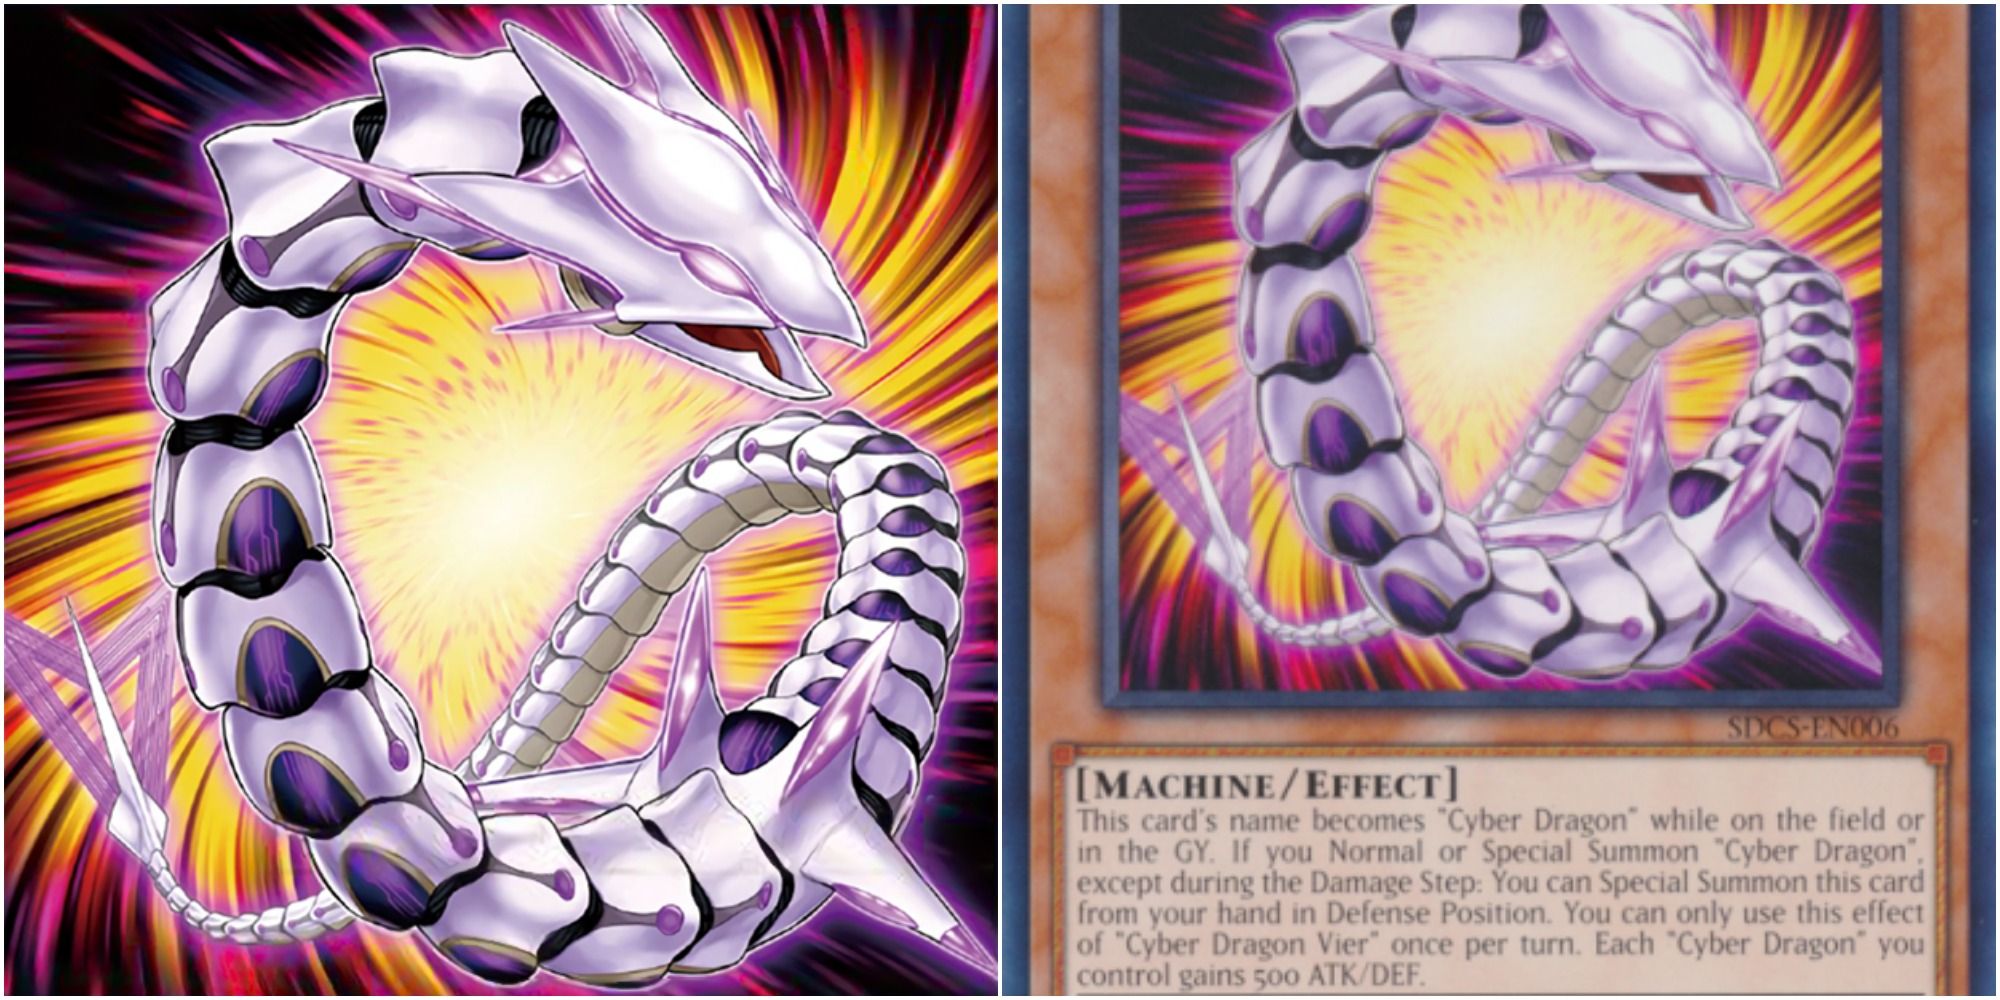 yugioh cyber dragon vier card art and text